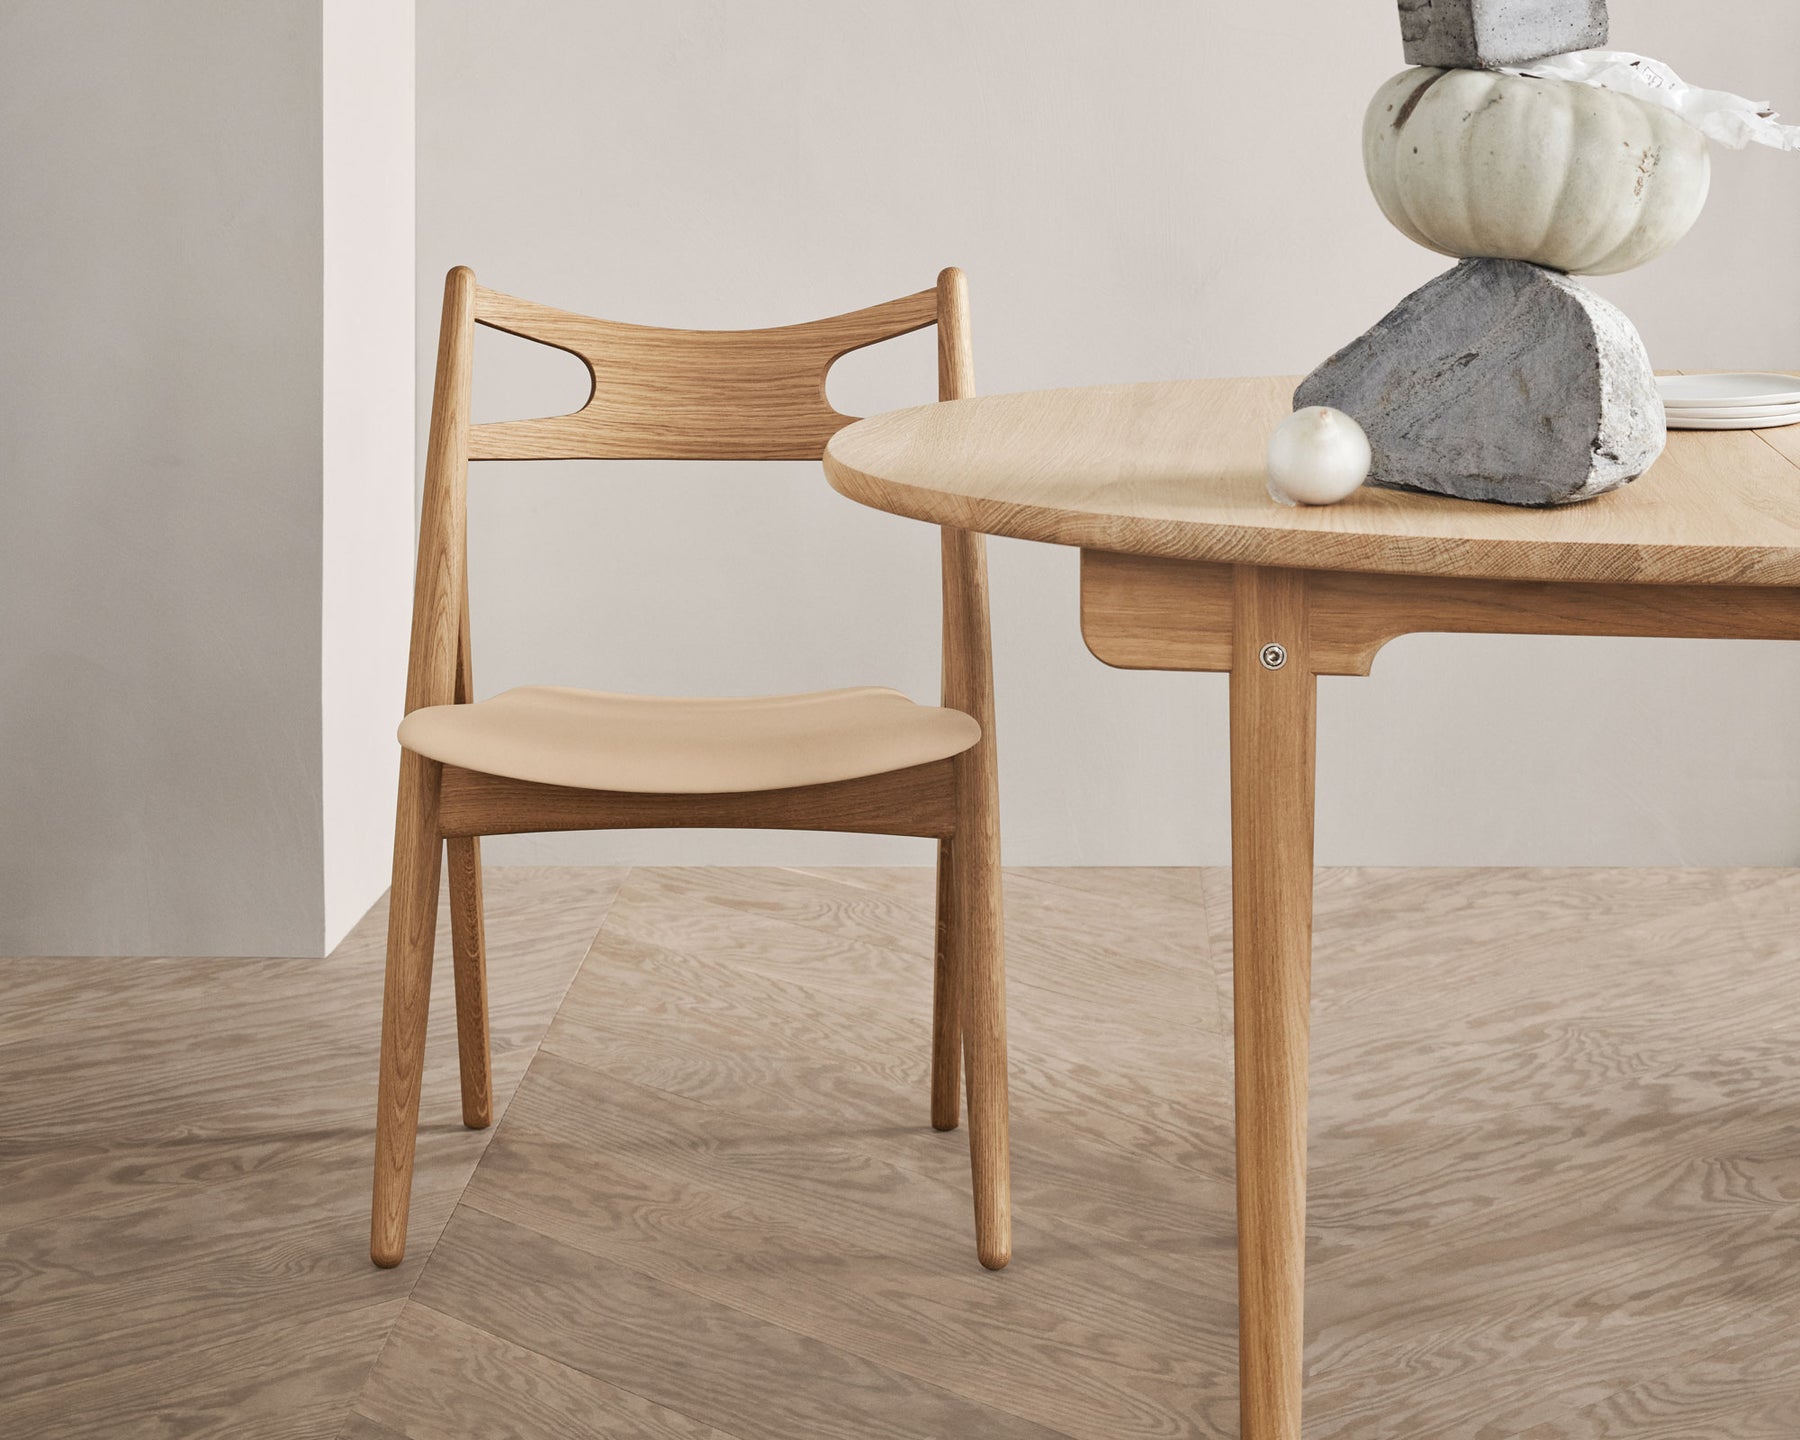 Light Wood Dining Table | DSHOP